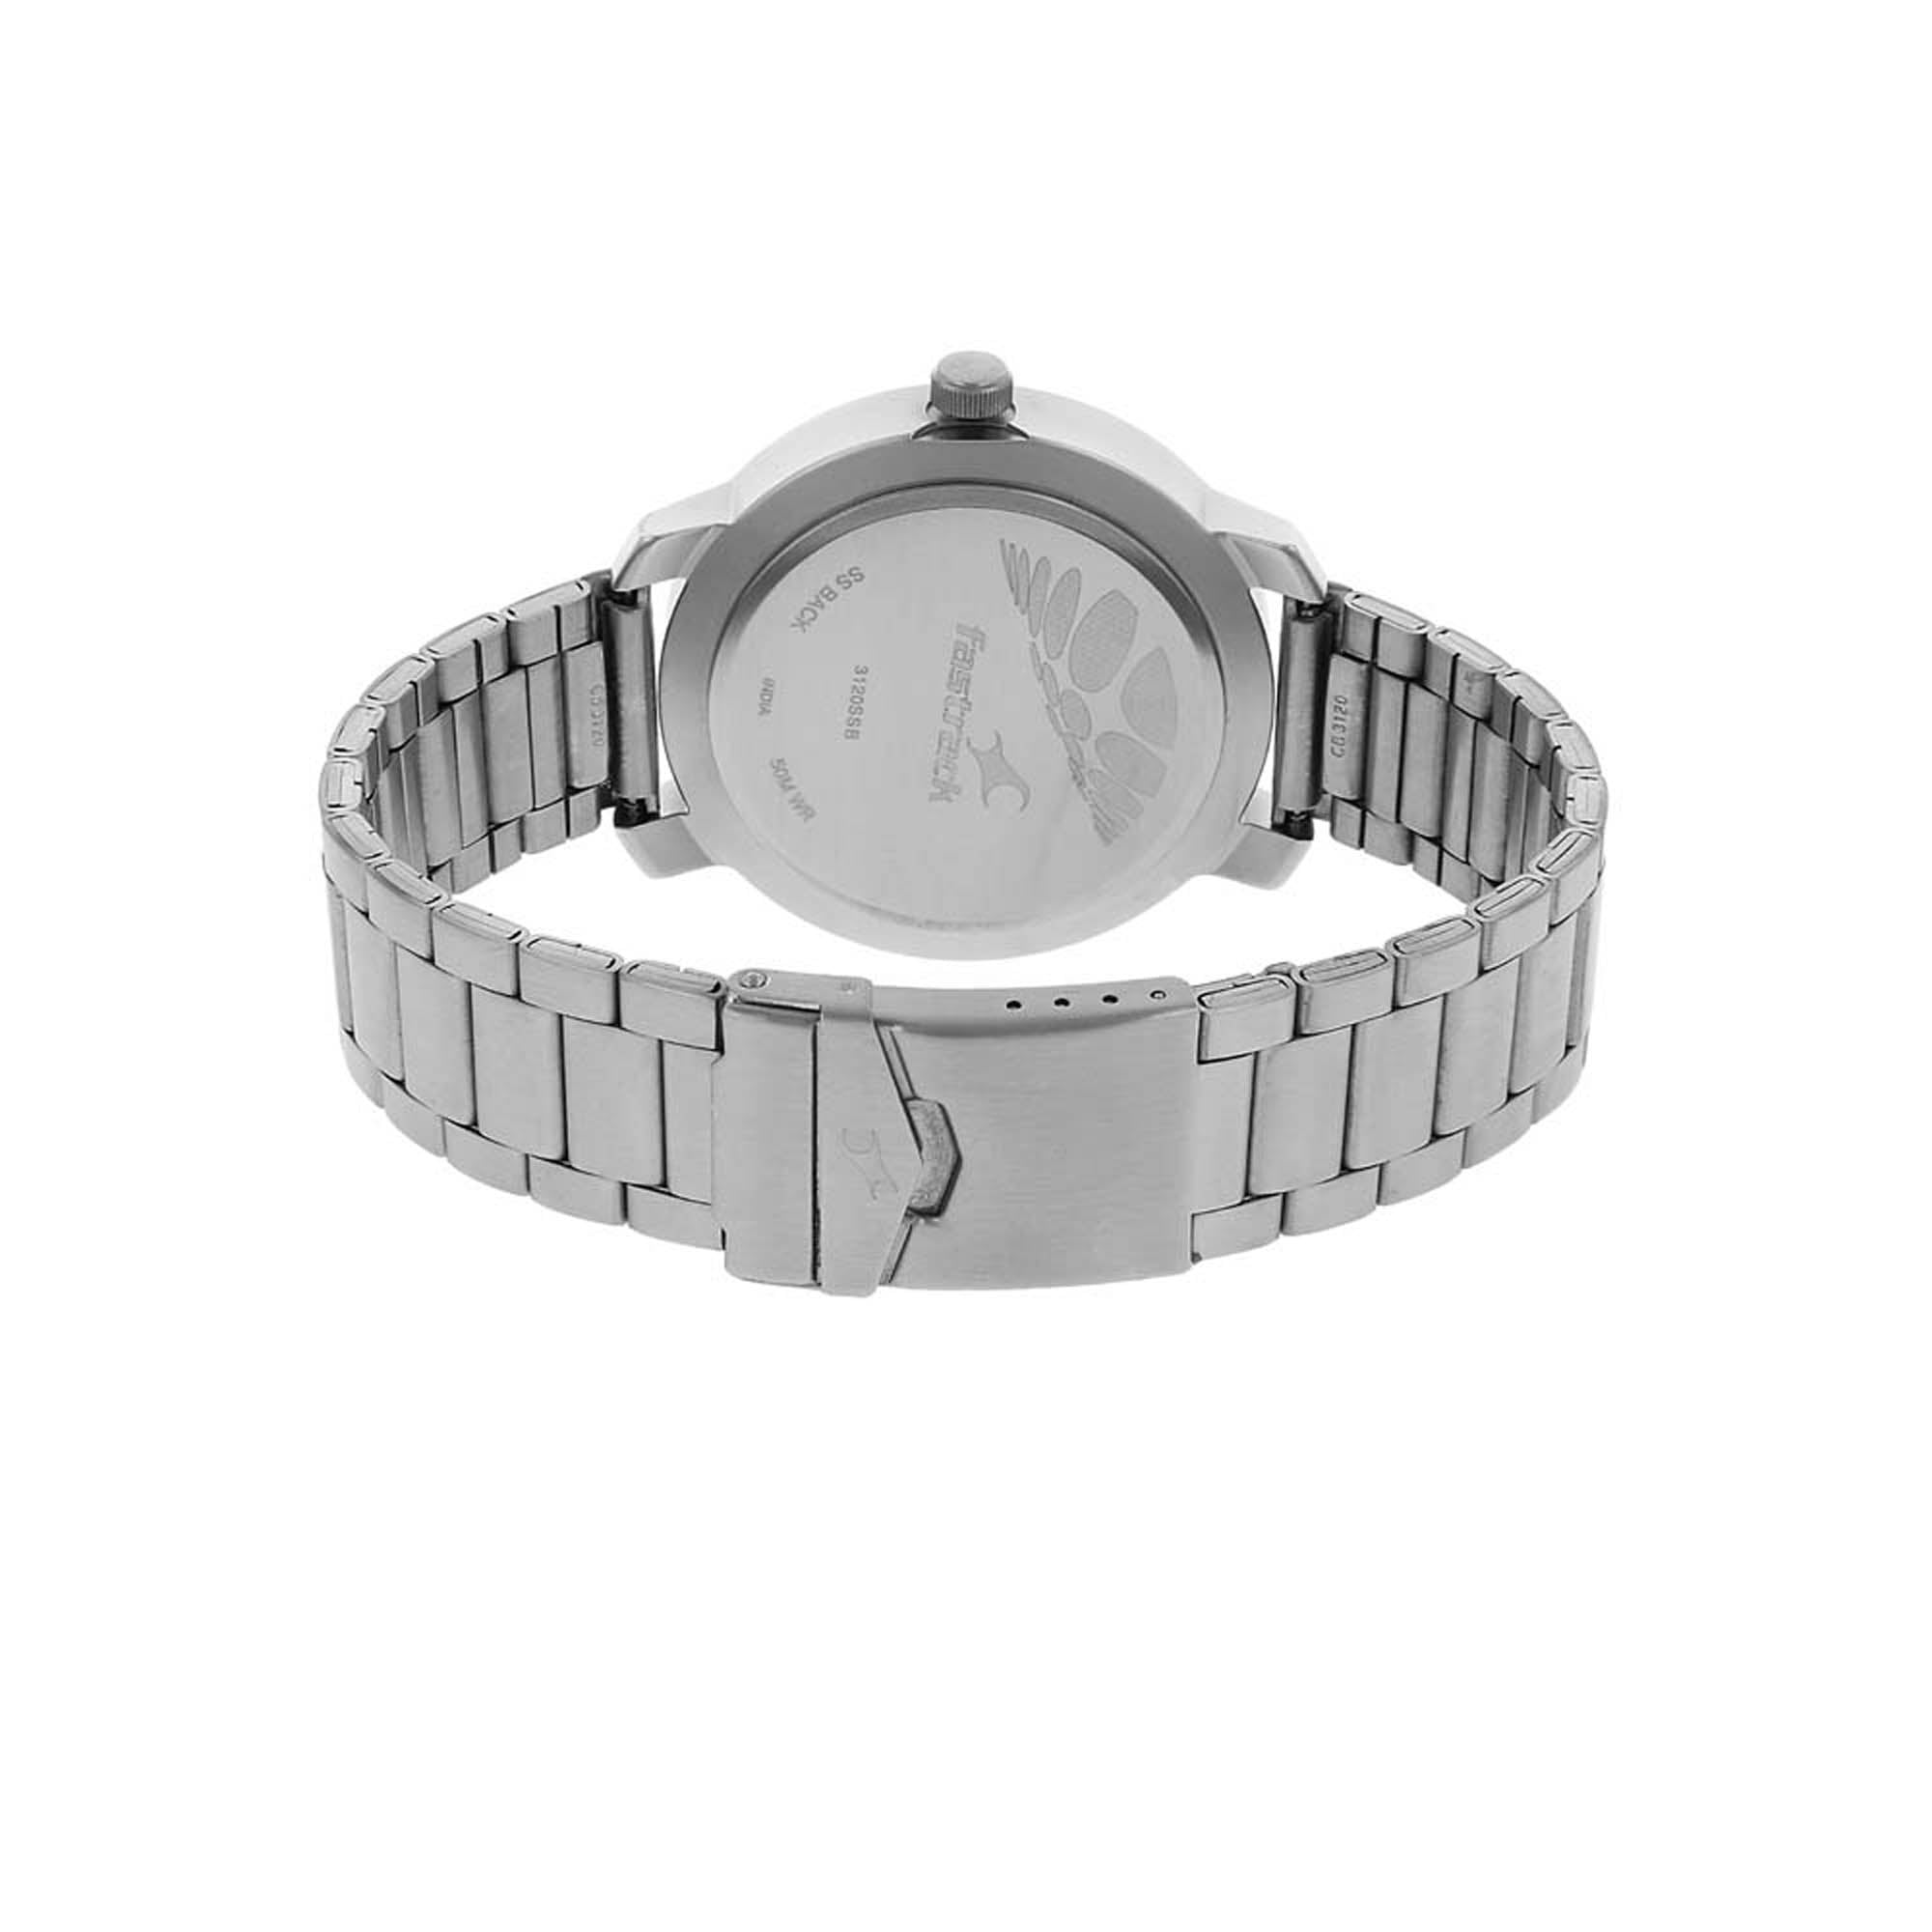 Fastrack Quartz Analog Silver Dial Stainless Steel Strap Watch for Guys